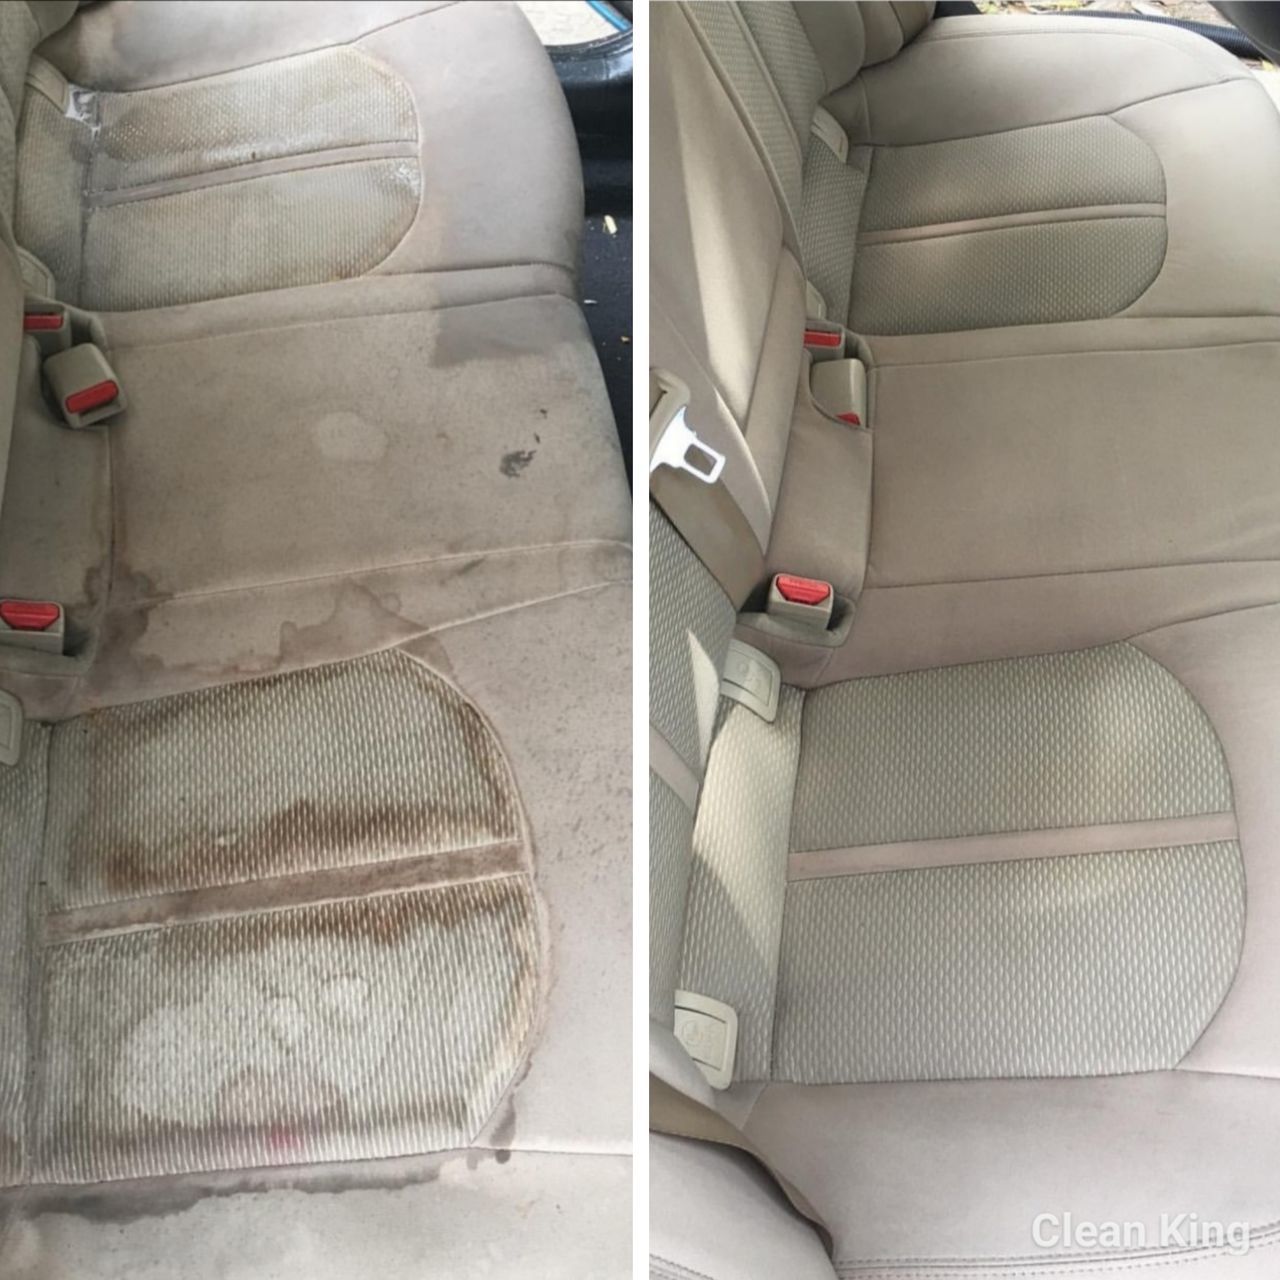 Dry Cleaning of the car Interior before and after